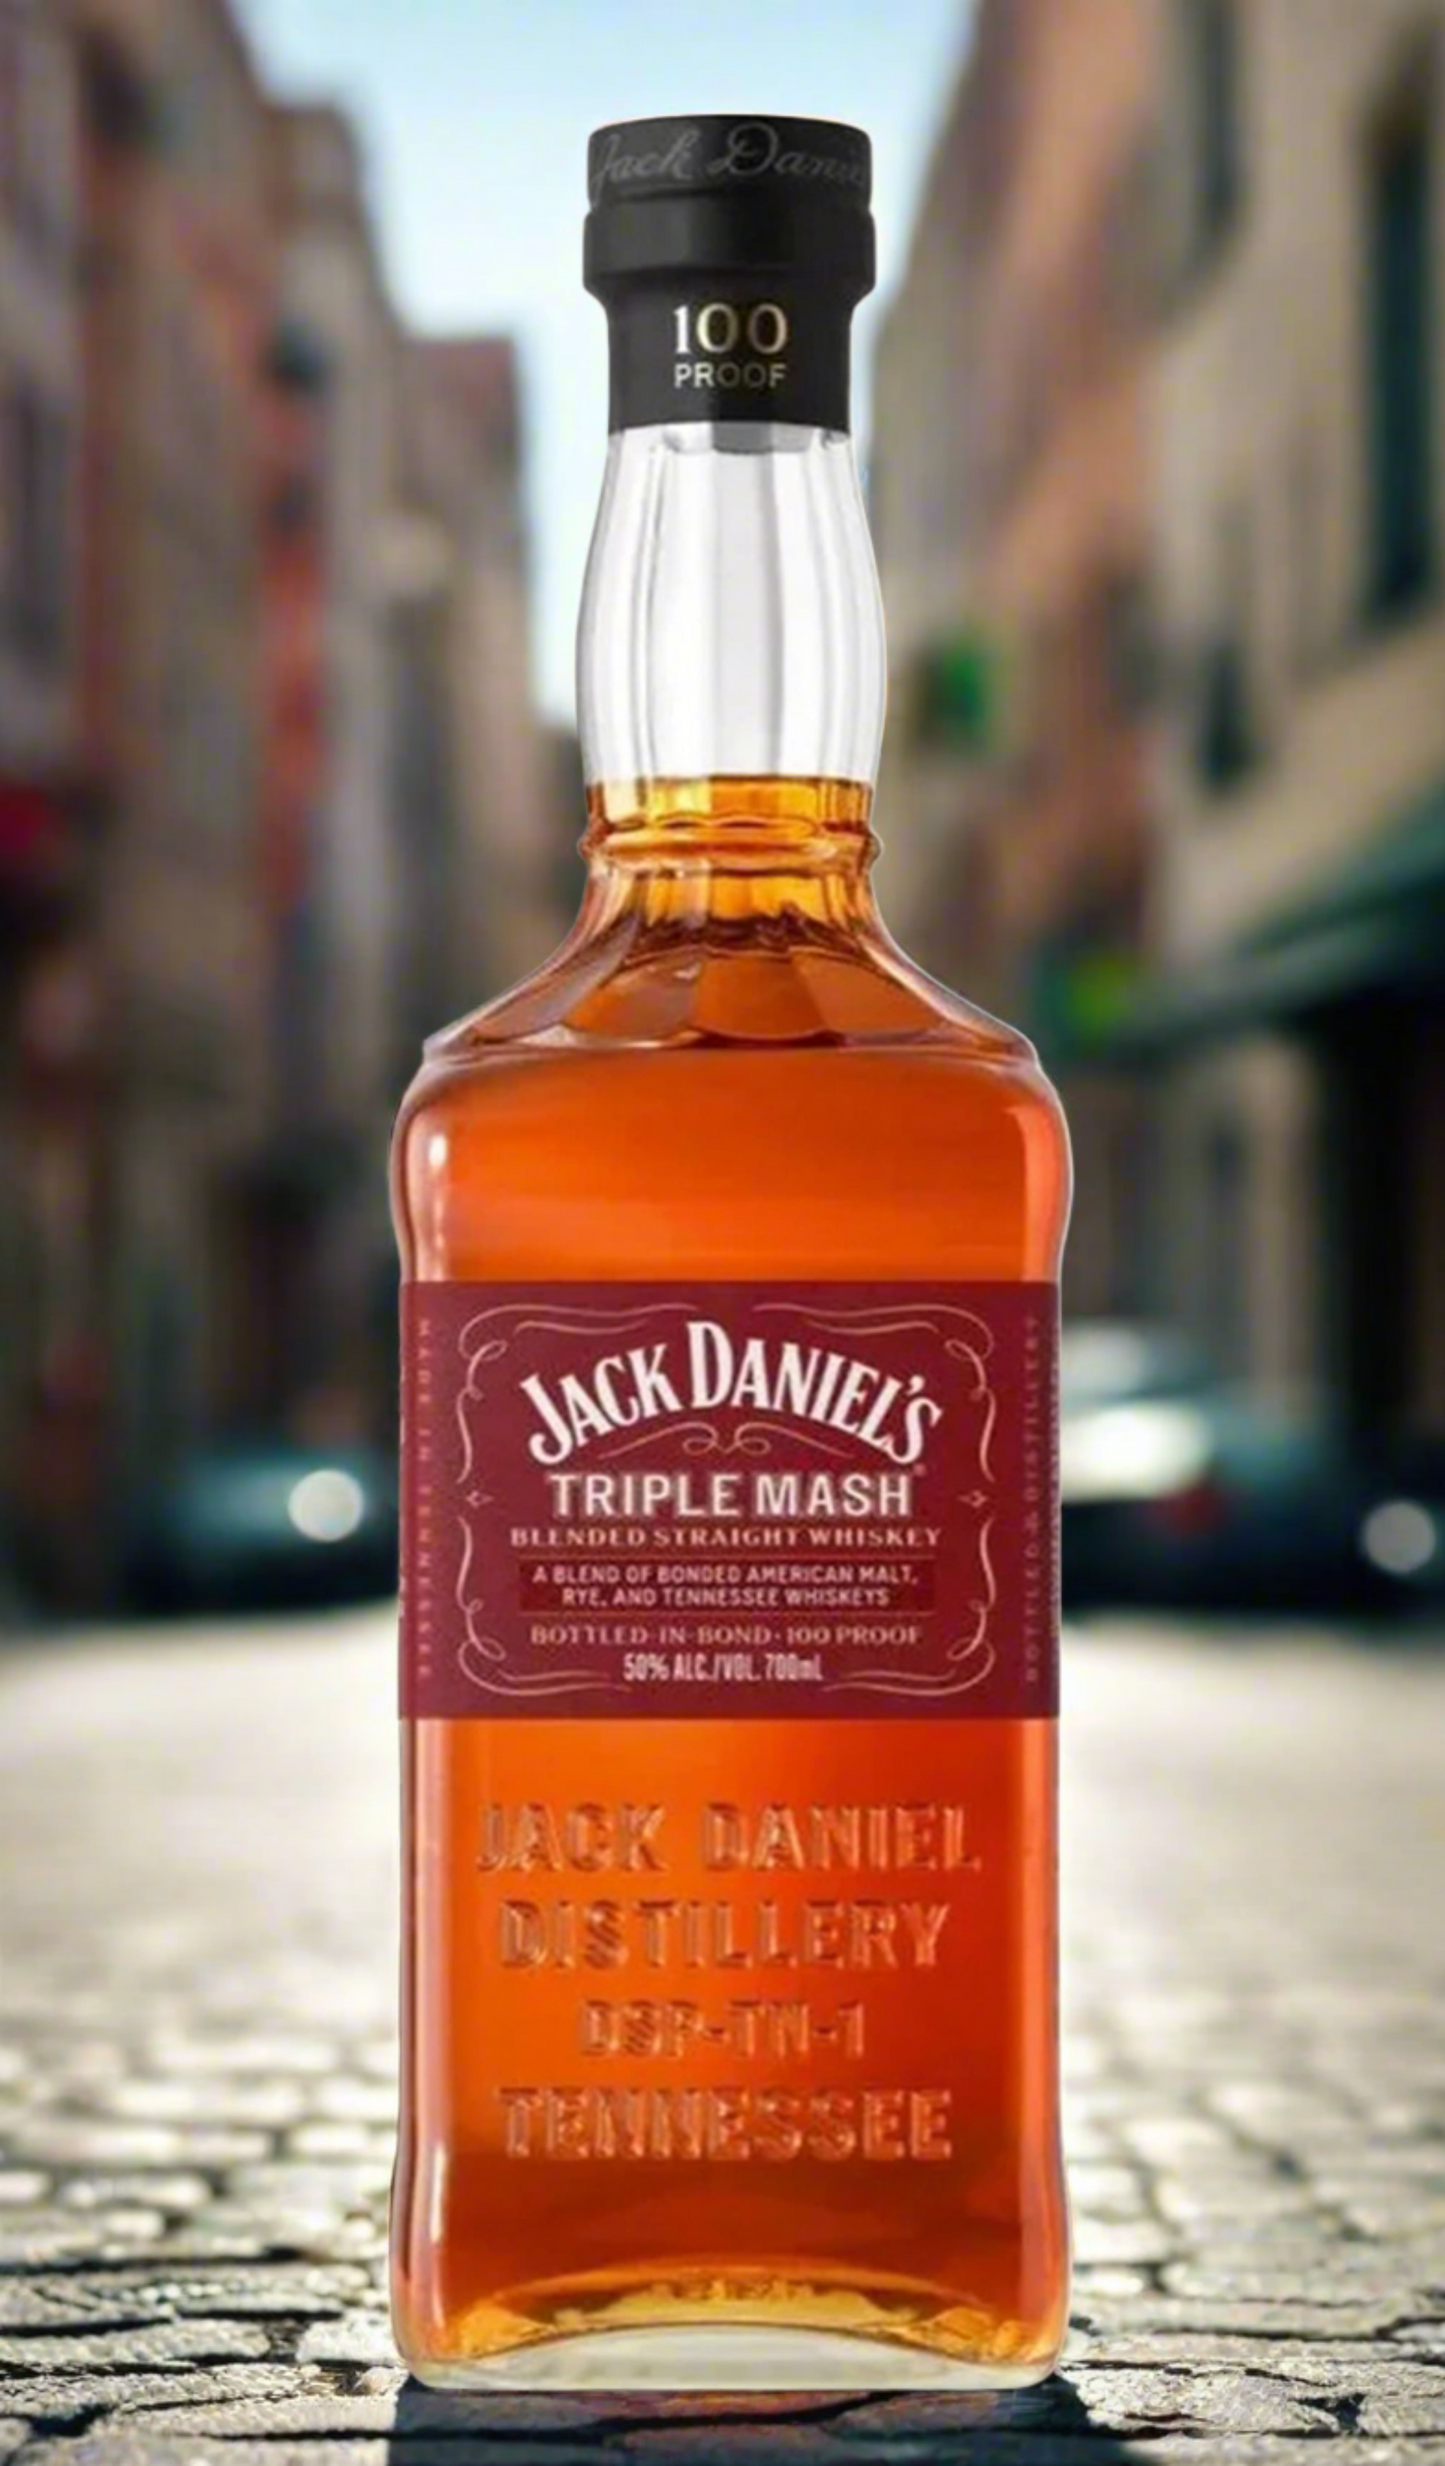 Find out more, explore the range and purchase Jack Daniel's Triple Mash Whiskey 700mL available online at Wine Sellers Direct - Australia's independent liquor specialists.